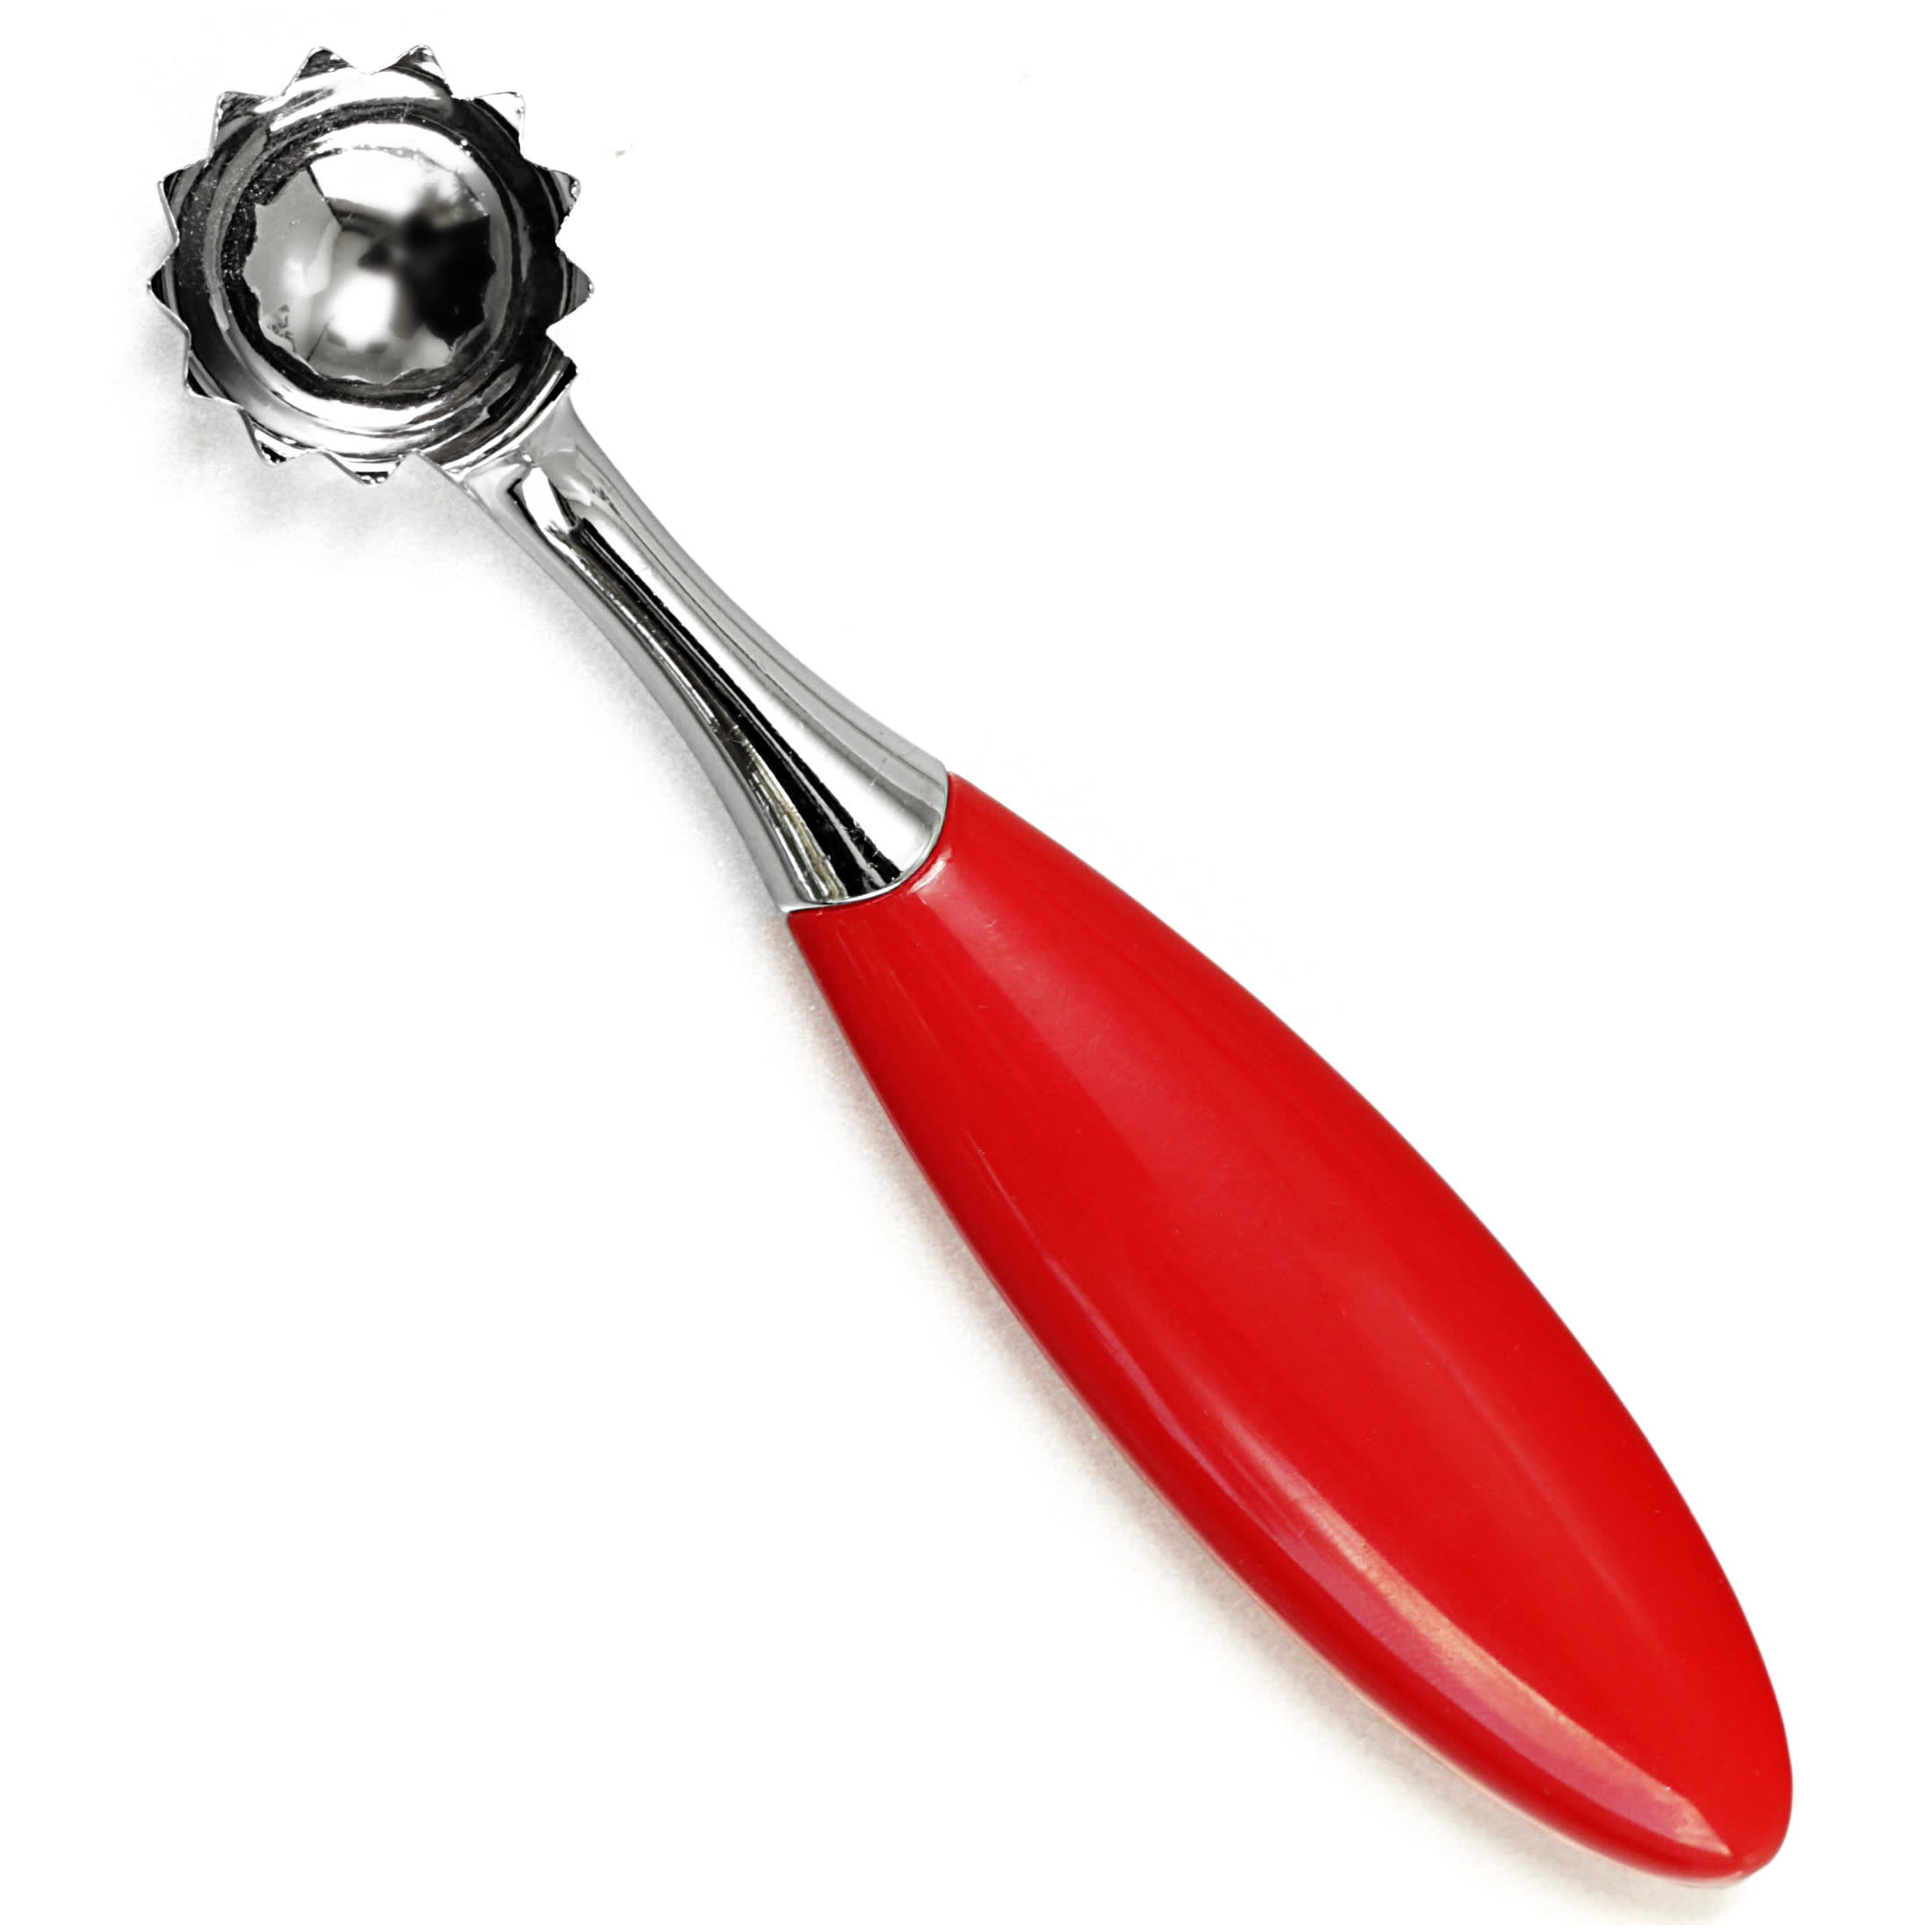 Pack of 2 Joie Stainless Steel Strawberry Huller